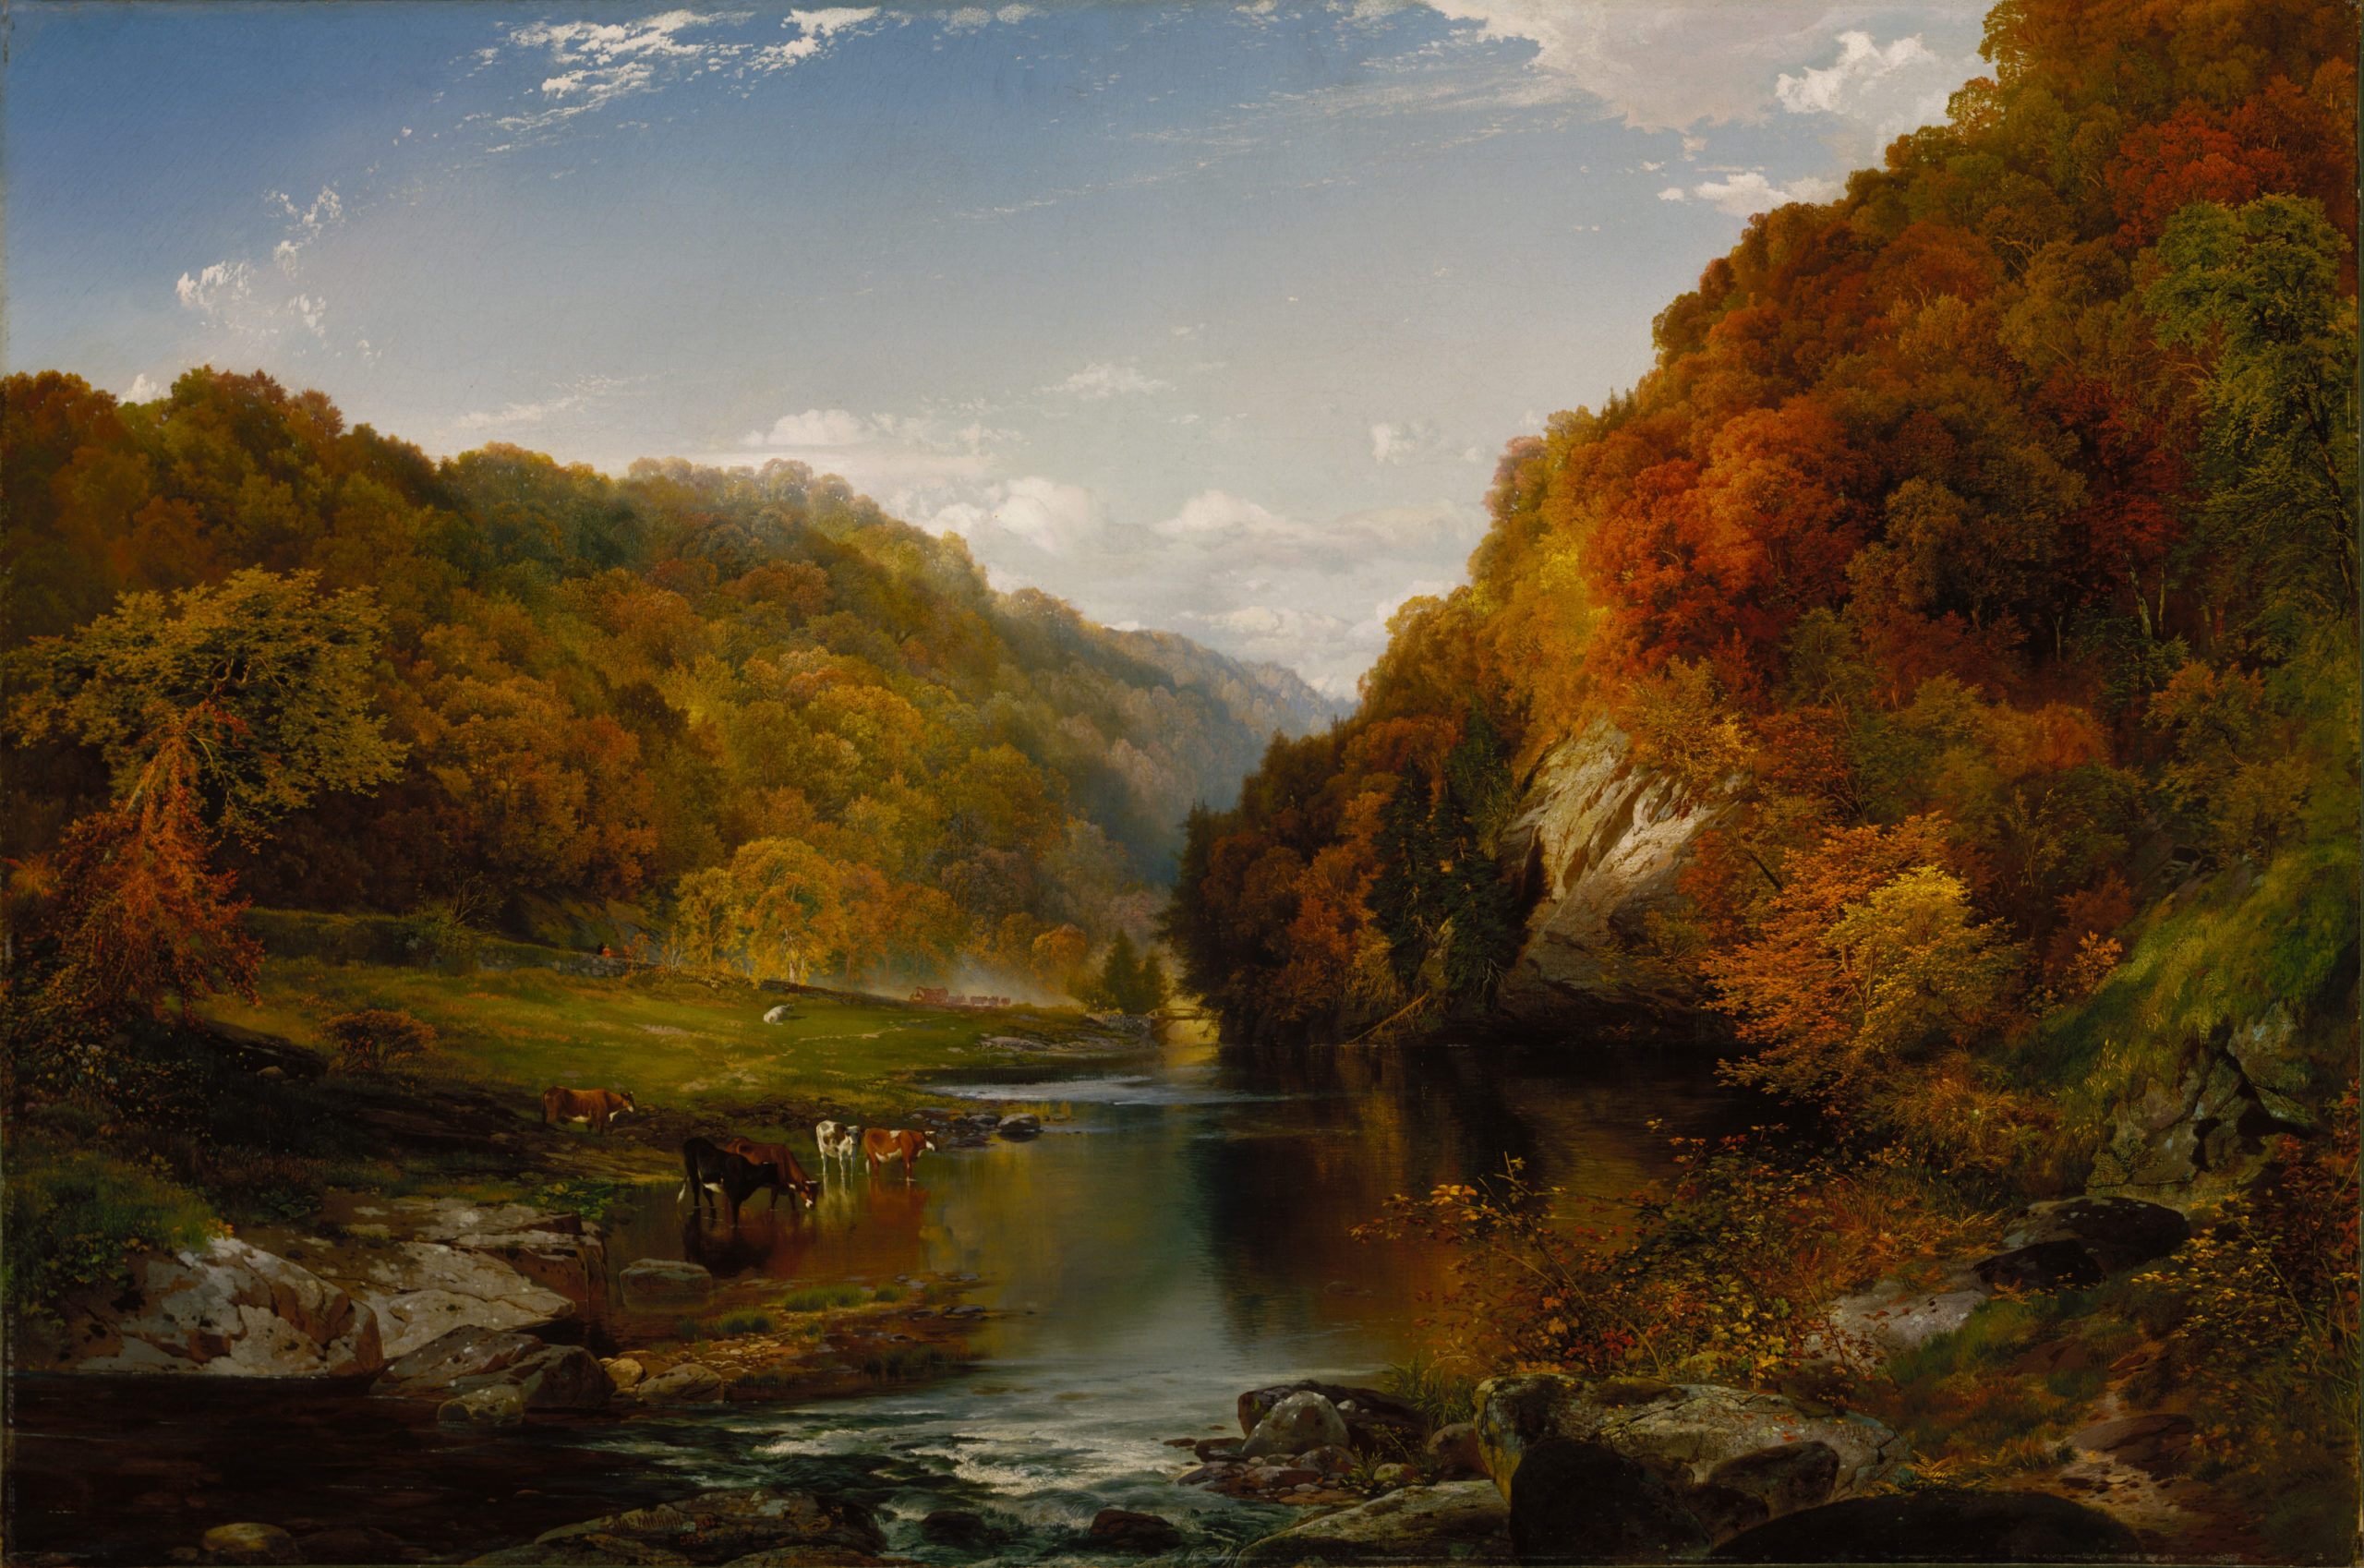 Thomas Moran, Autumn Afternoon, the Wissahickon, 1864, oil on canvas, 30 1/4 x 45 1/4 inches (Terra Foundation for American Art)